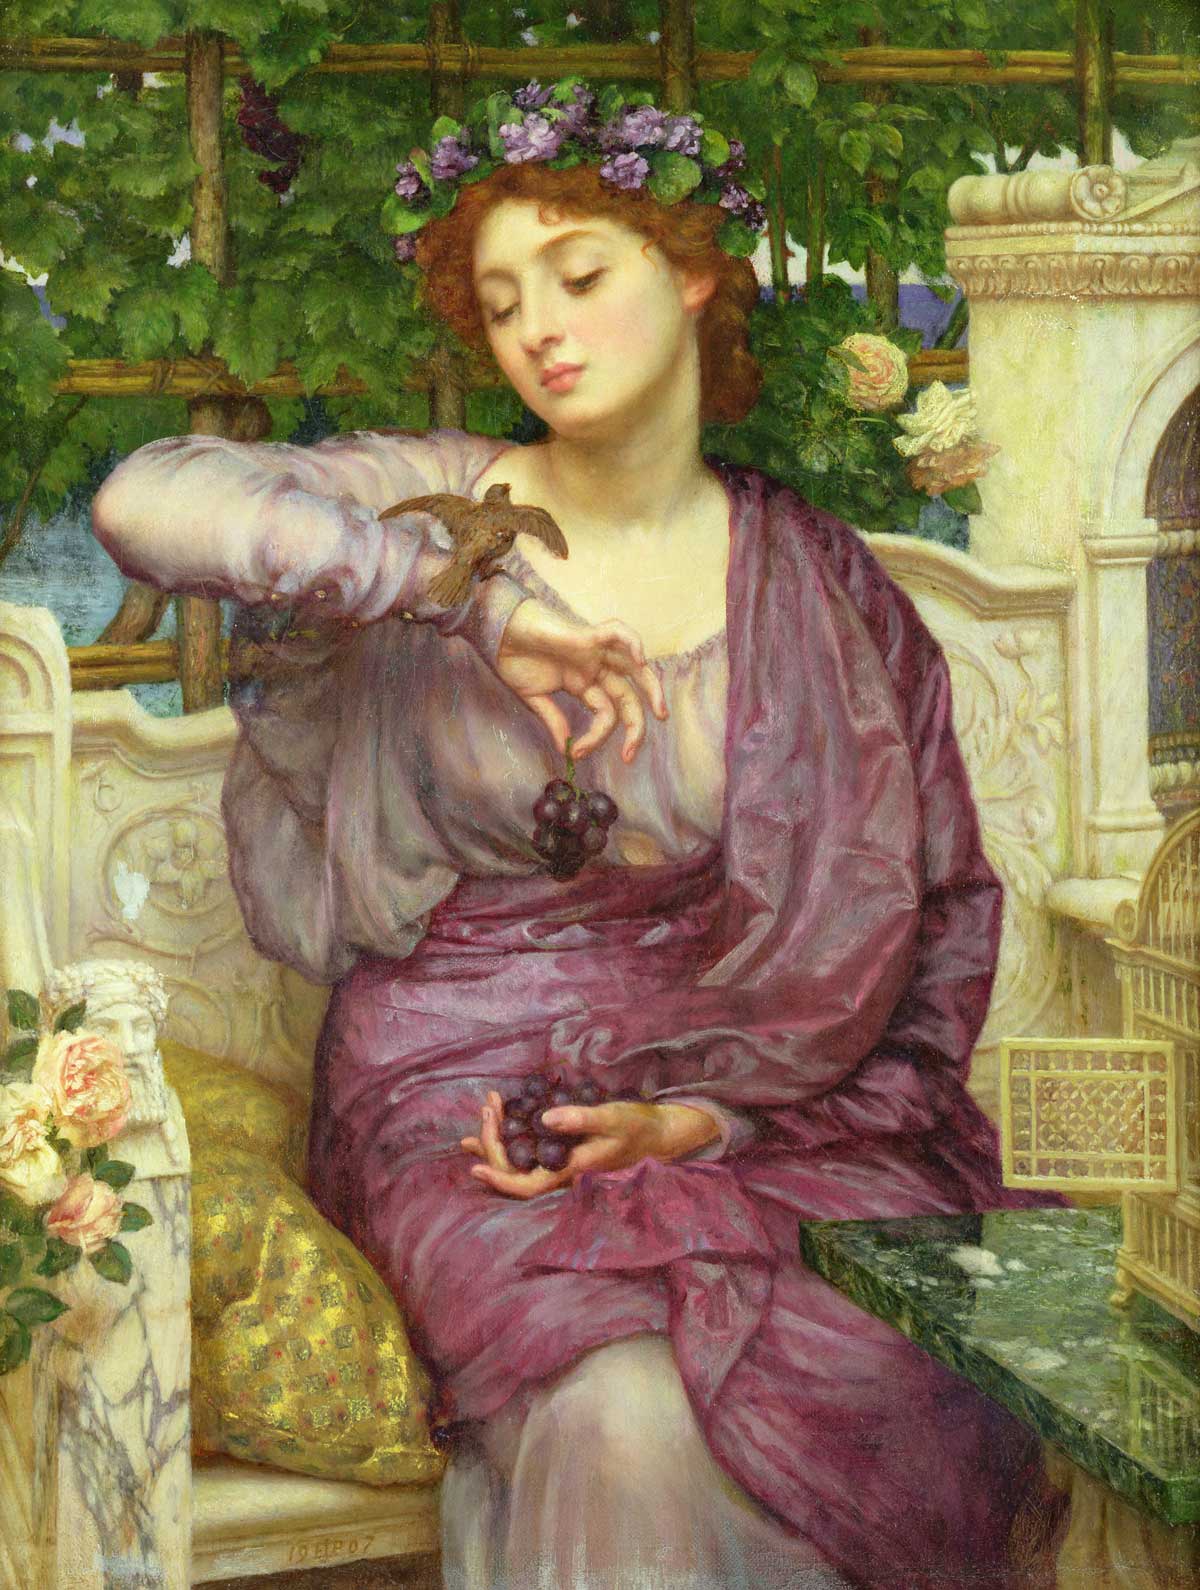 Lesbia and her Sparrow, by Edward John Poynter, British, 1907.